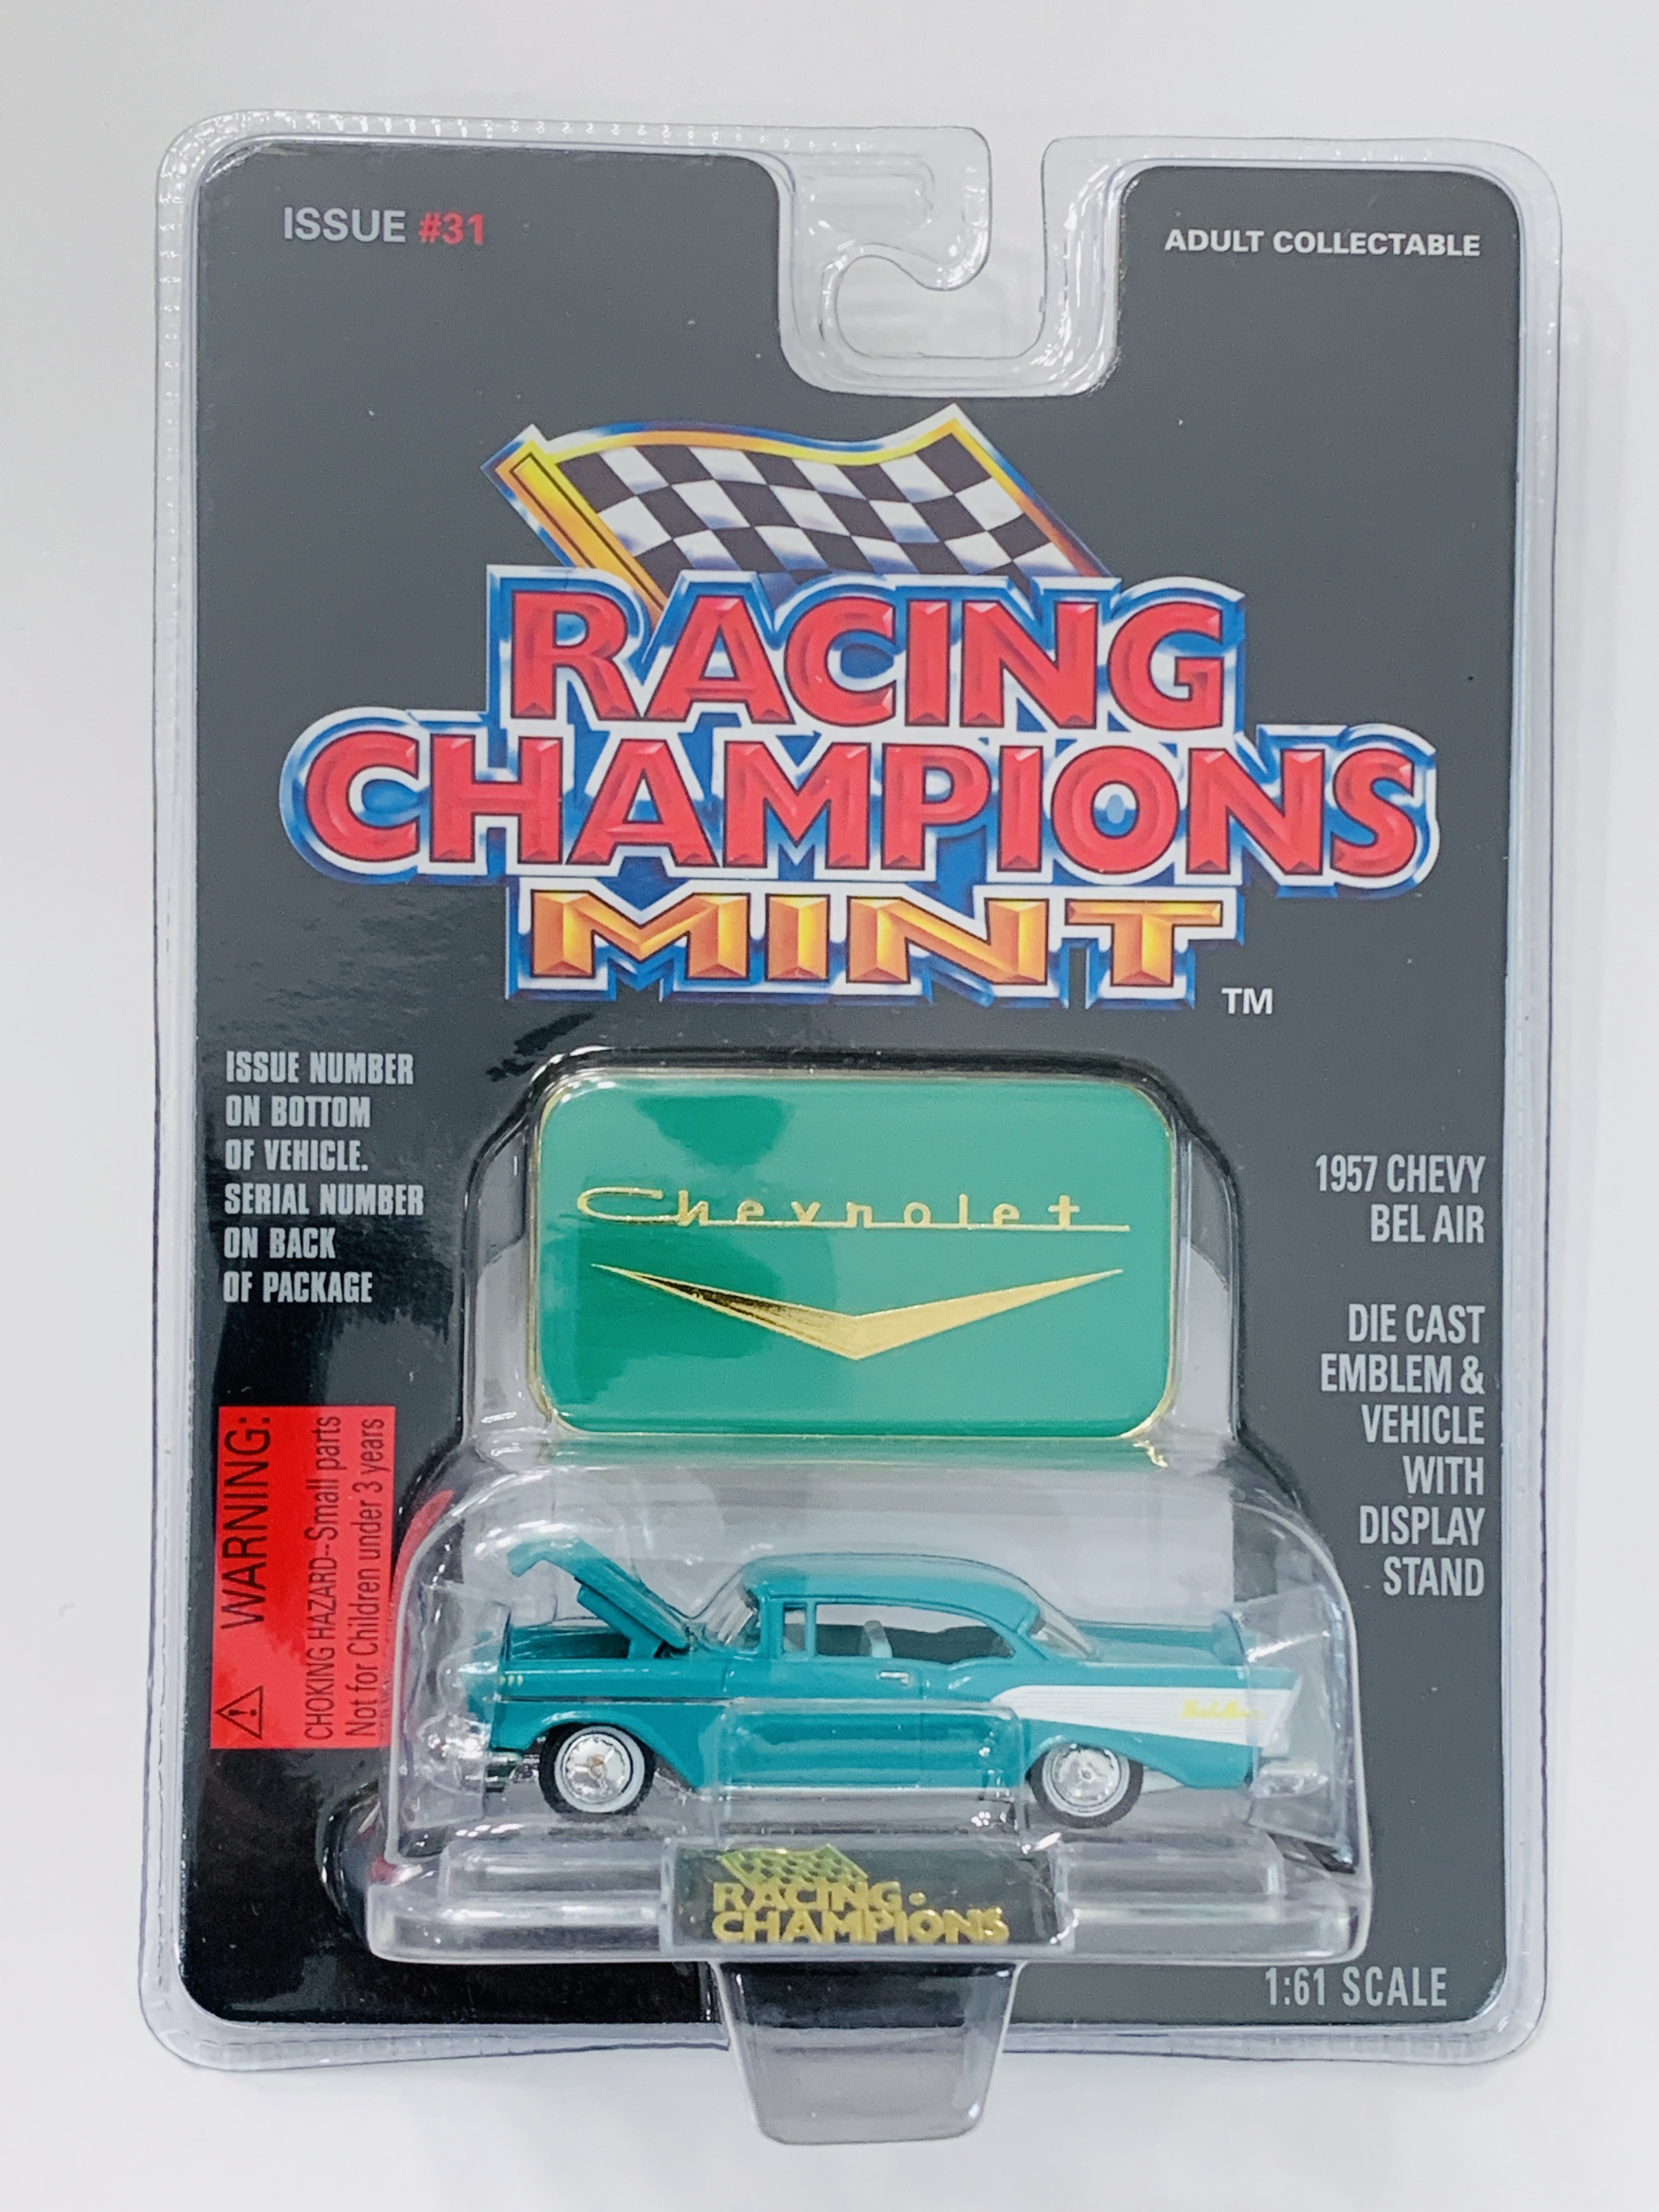 Racing Champions Mint Edition 1957 Chevrolet Bel Air - Teal